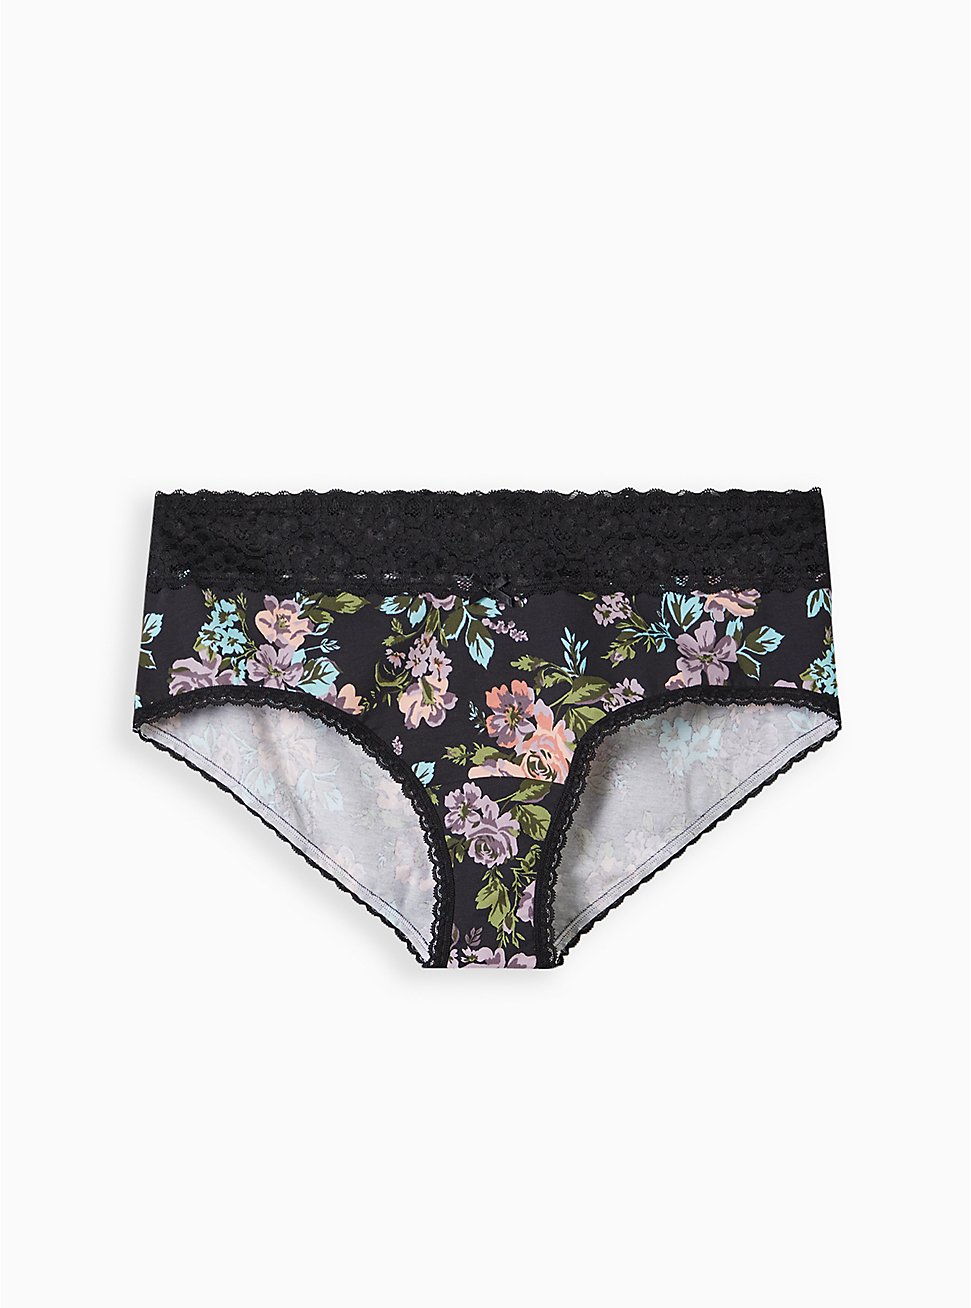 Wide Lace Cheeky Panty - Cotton Floral Black, PINK SWEAR FLORAL, hi-res